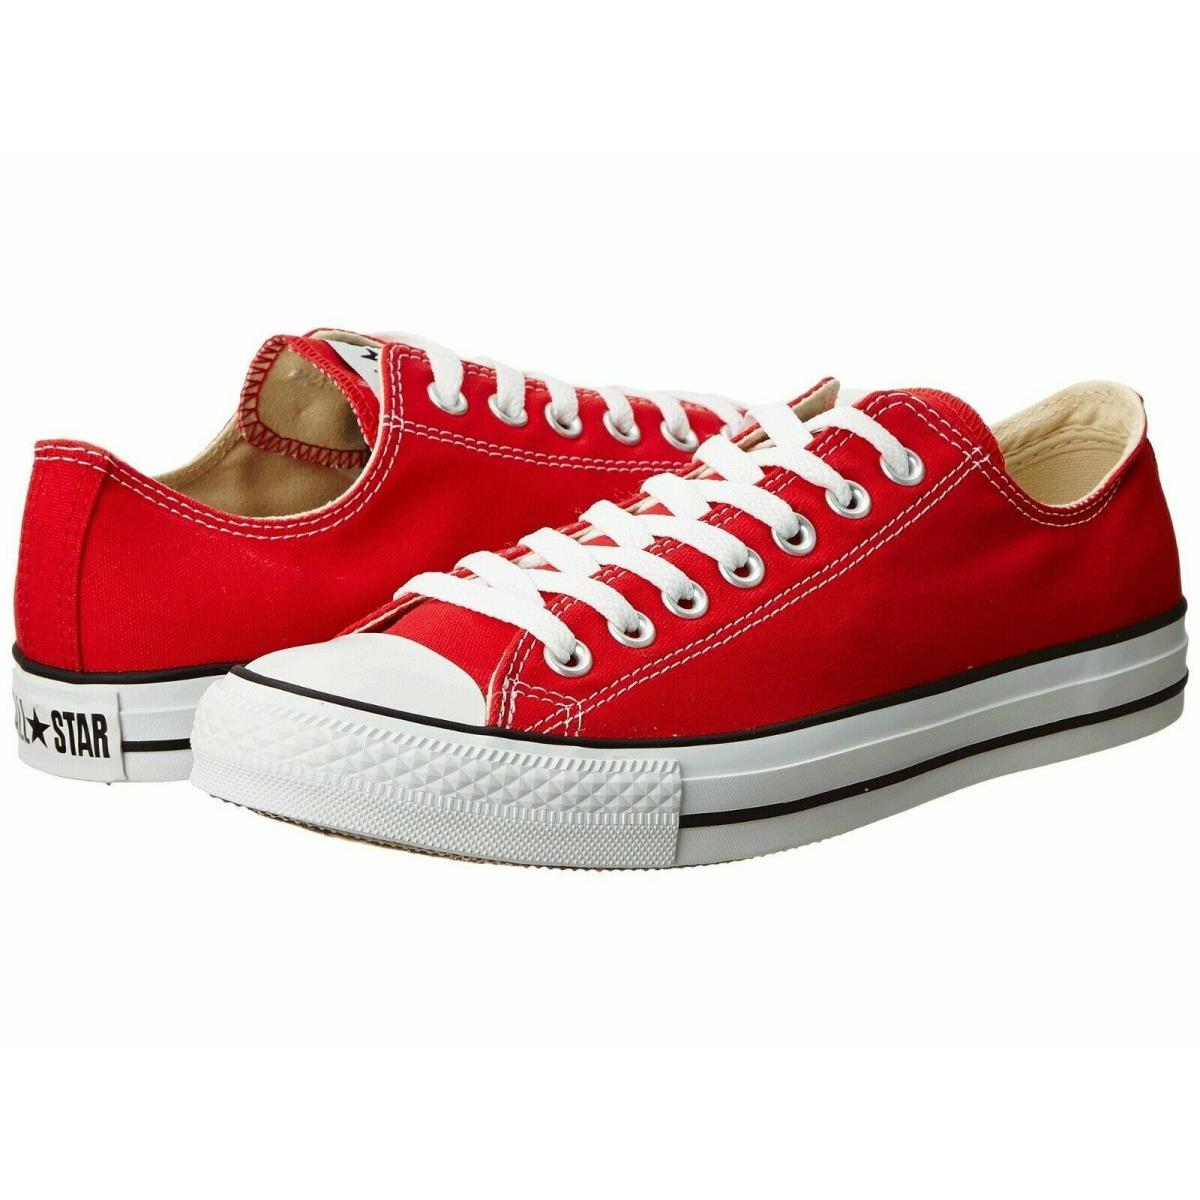 Converse Unisex All Star Chuck Taylor Low Top Athletic Shoes 4 Colors Red